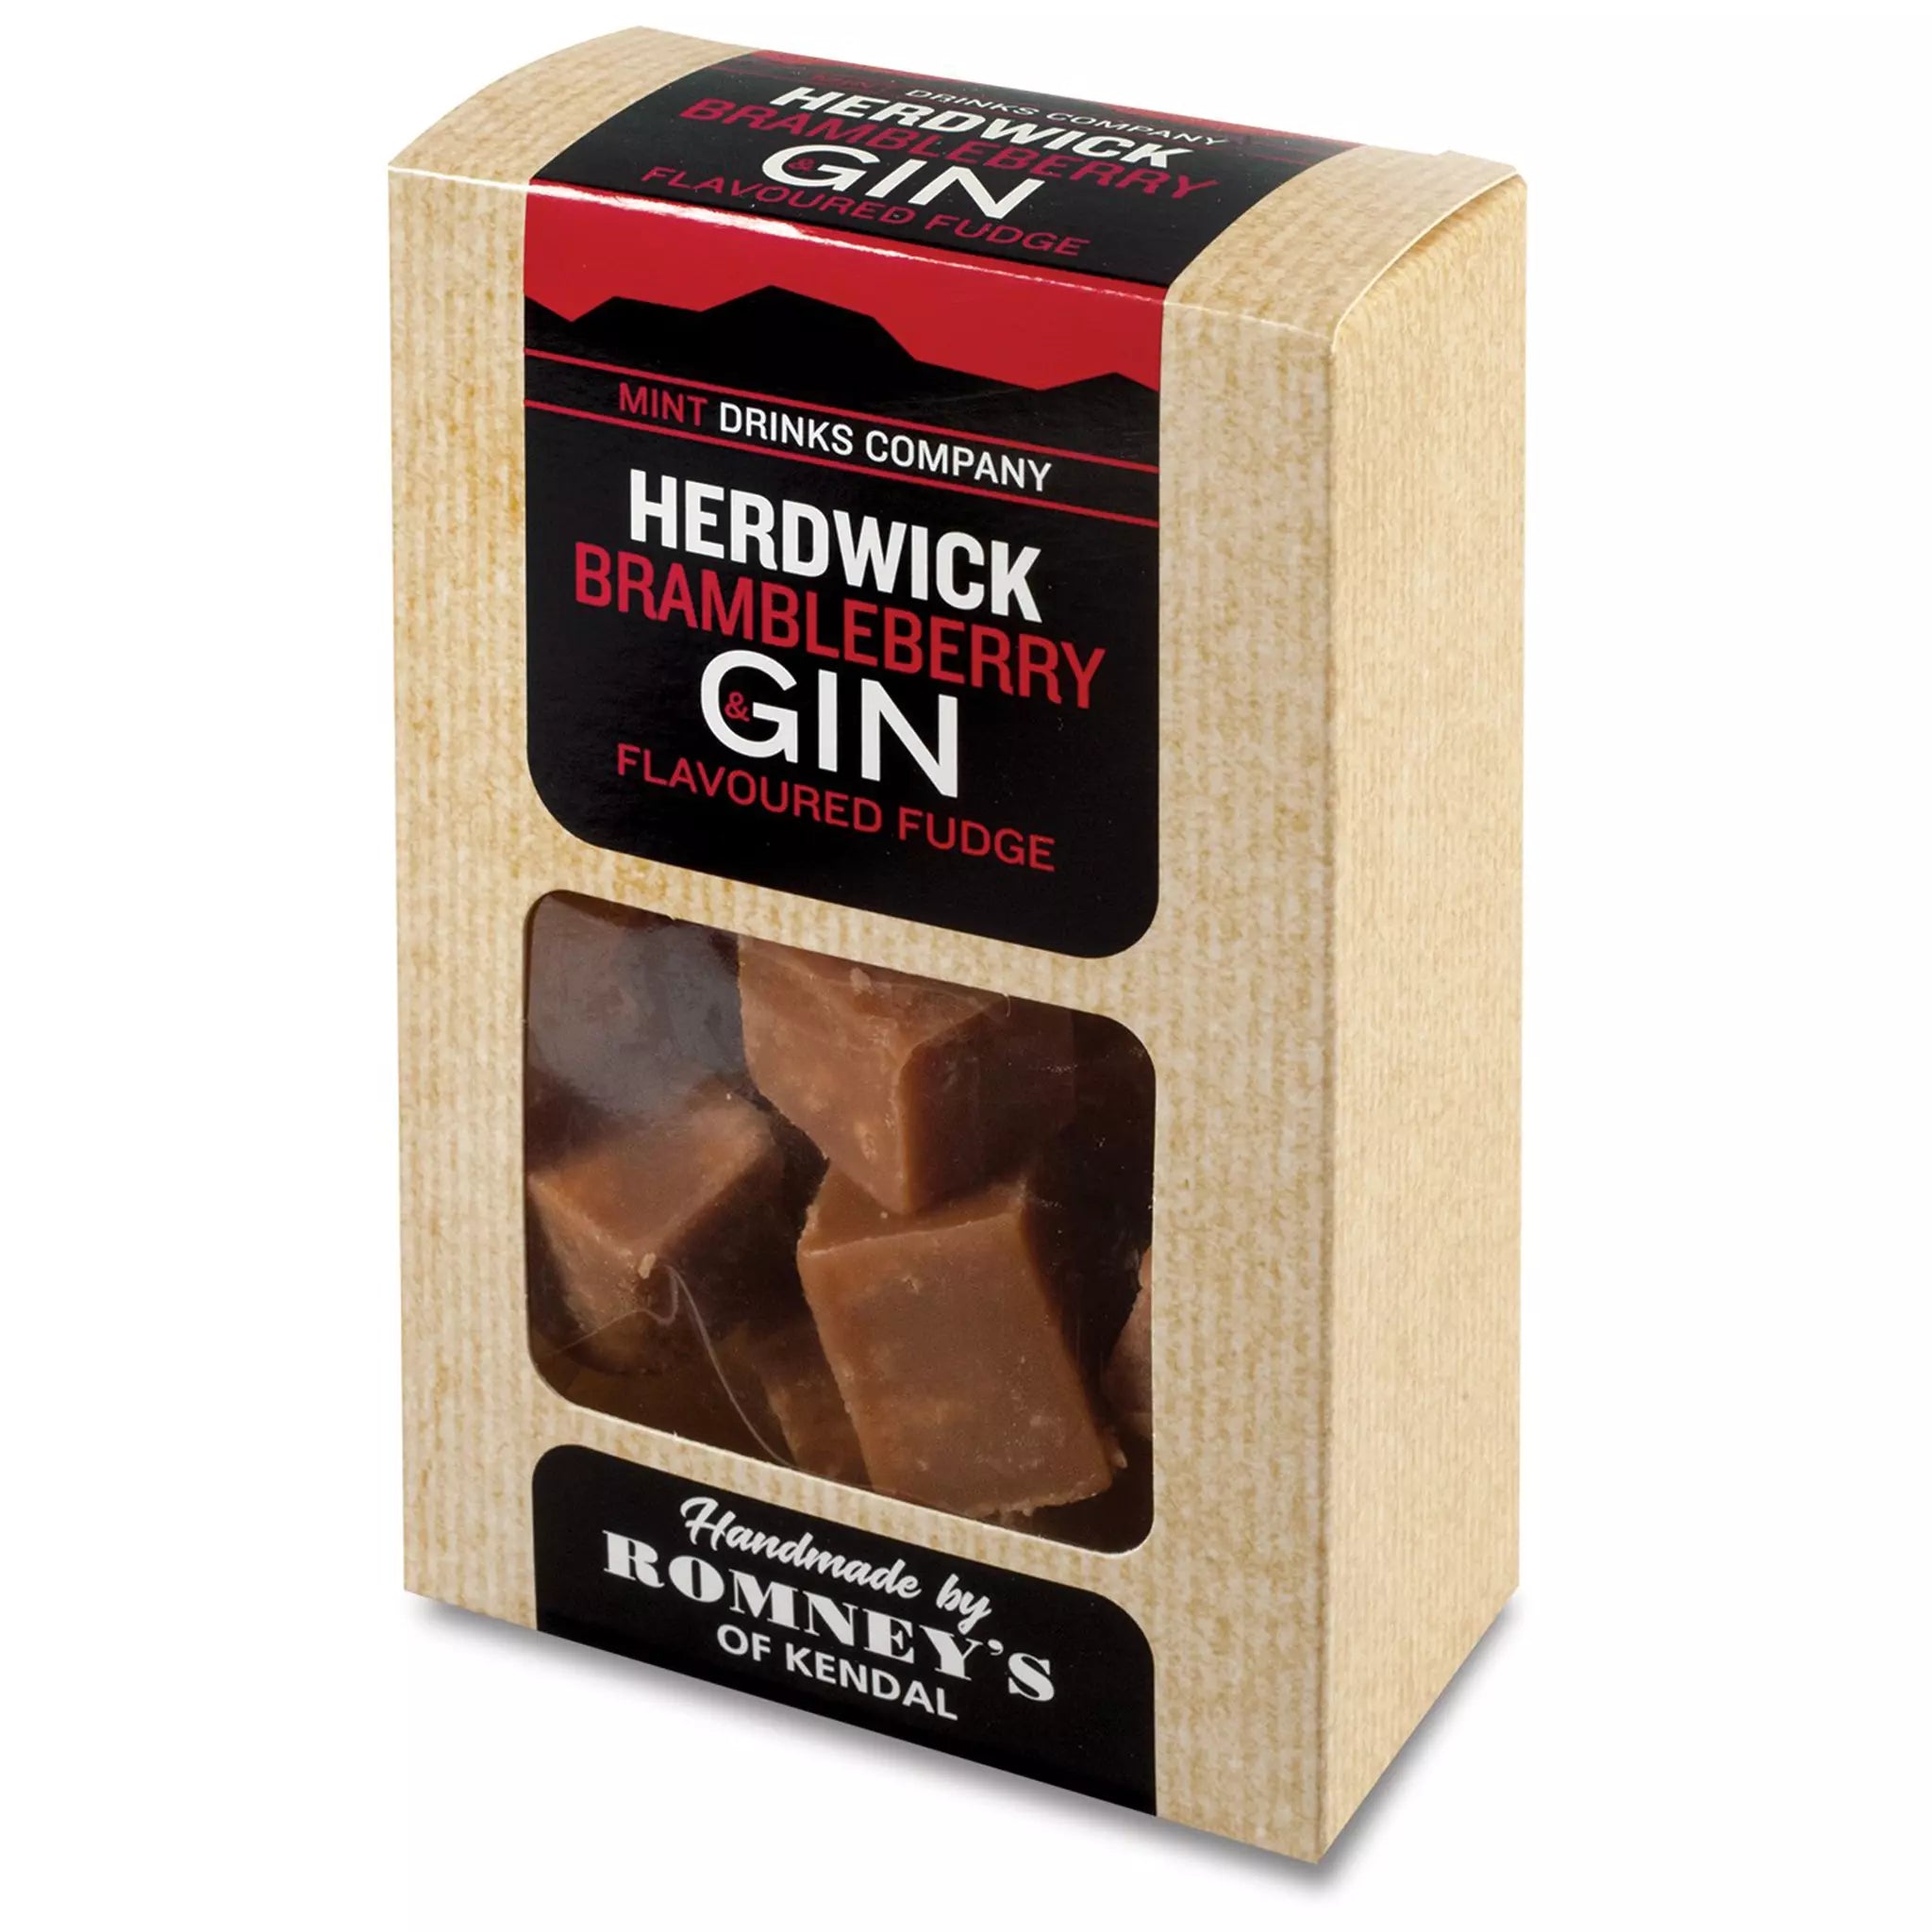 a rectangular cardboard box containing a transparent bag of fudge. The box has a black and red label that states 'Herdwick Brambleberry Gin Flavoured Fudge.